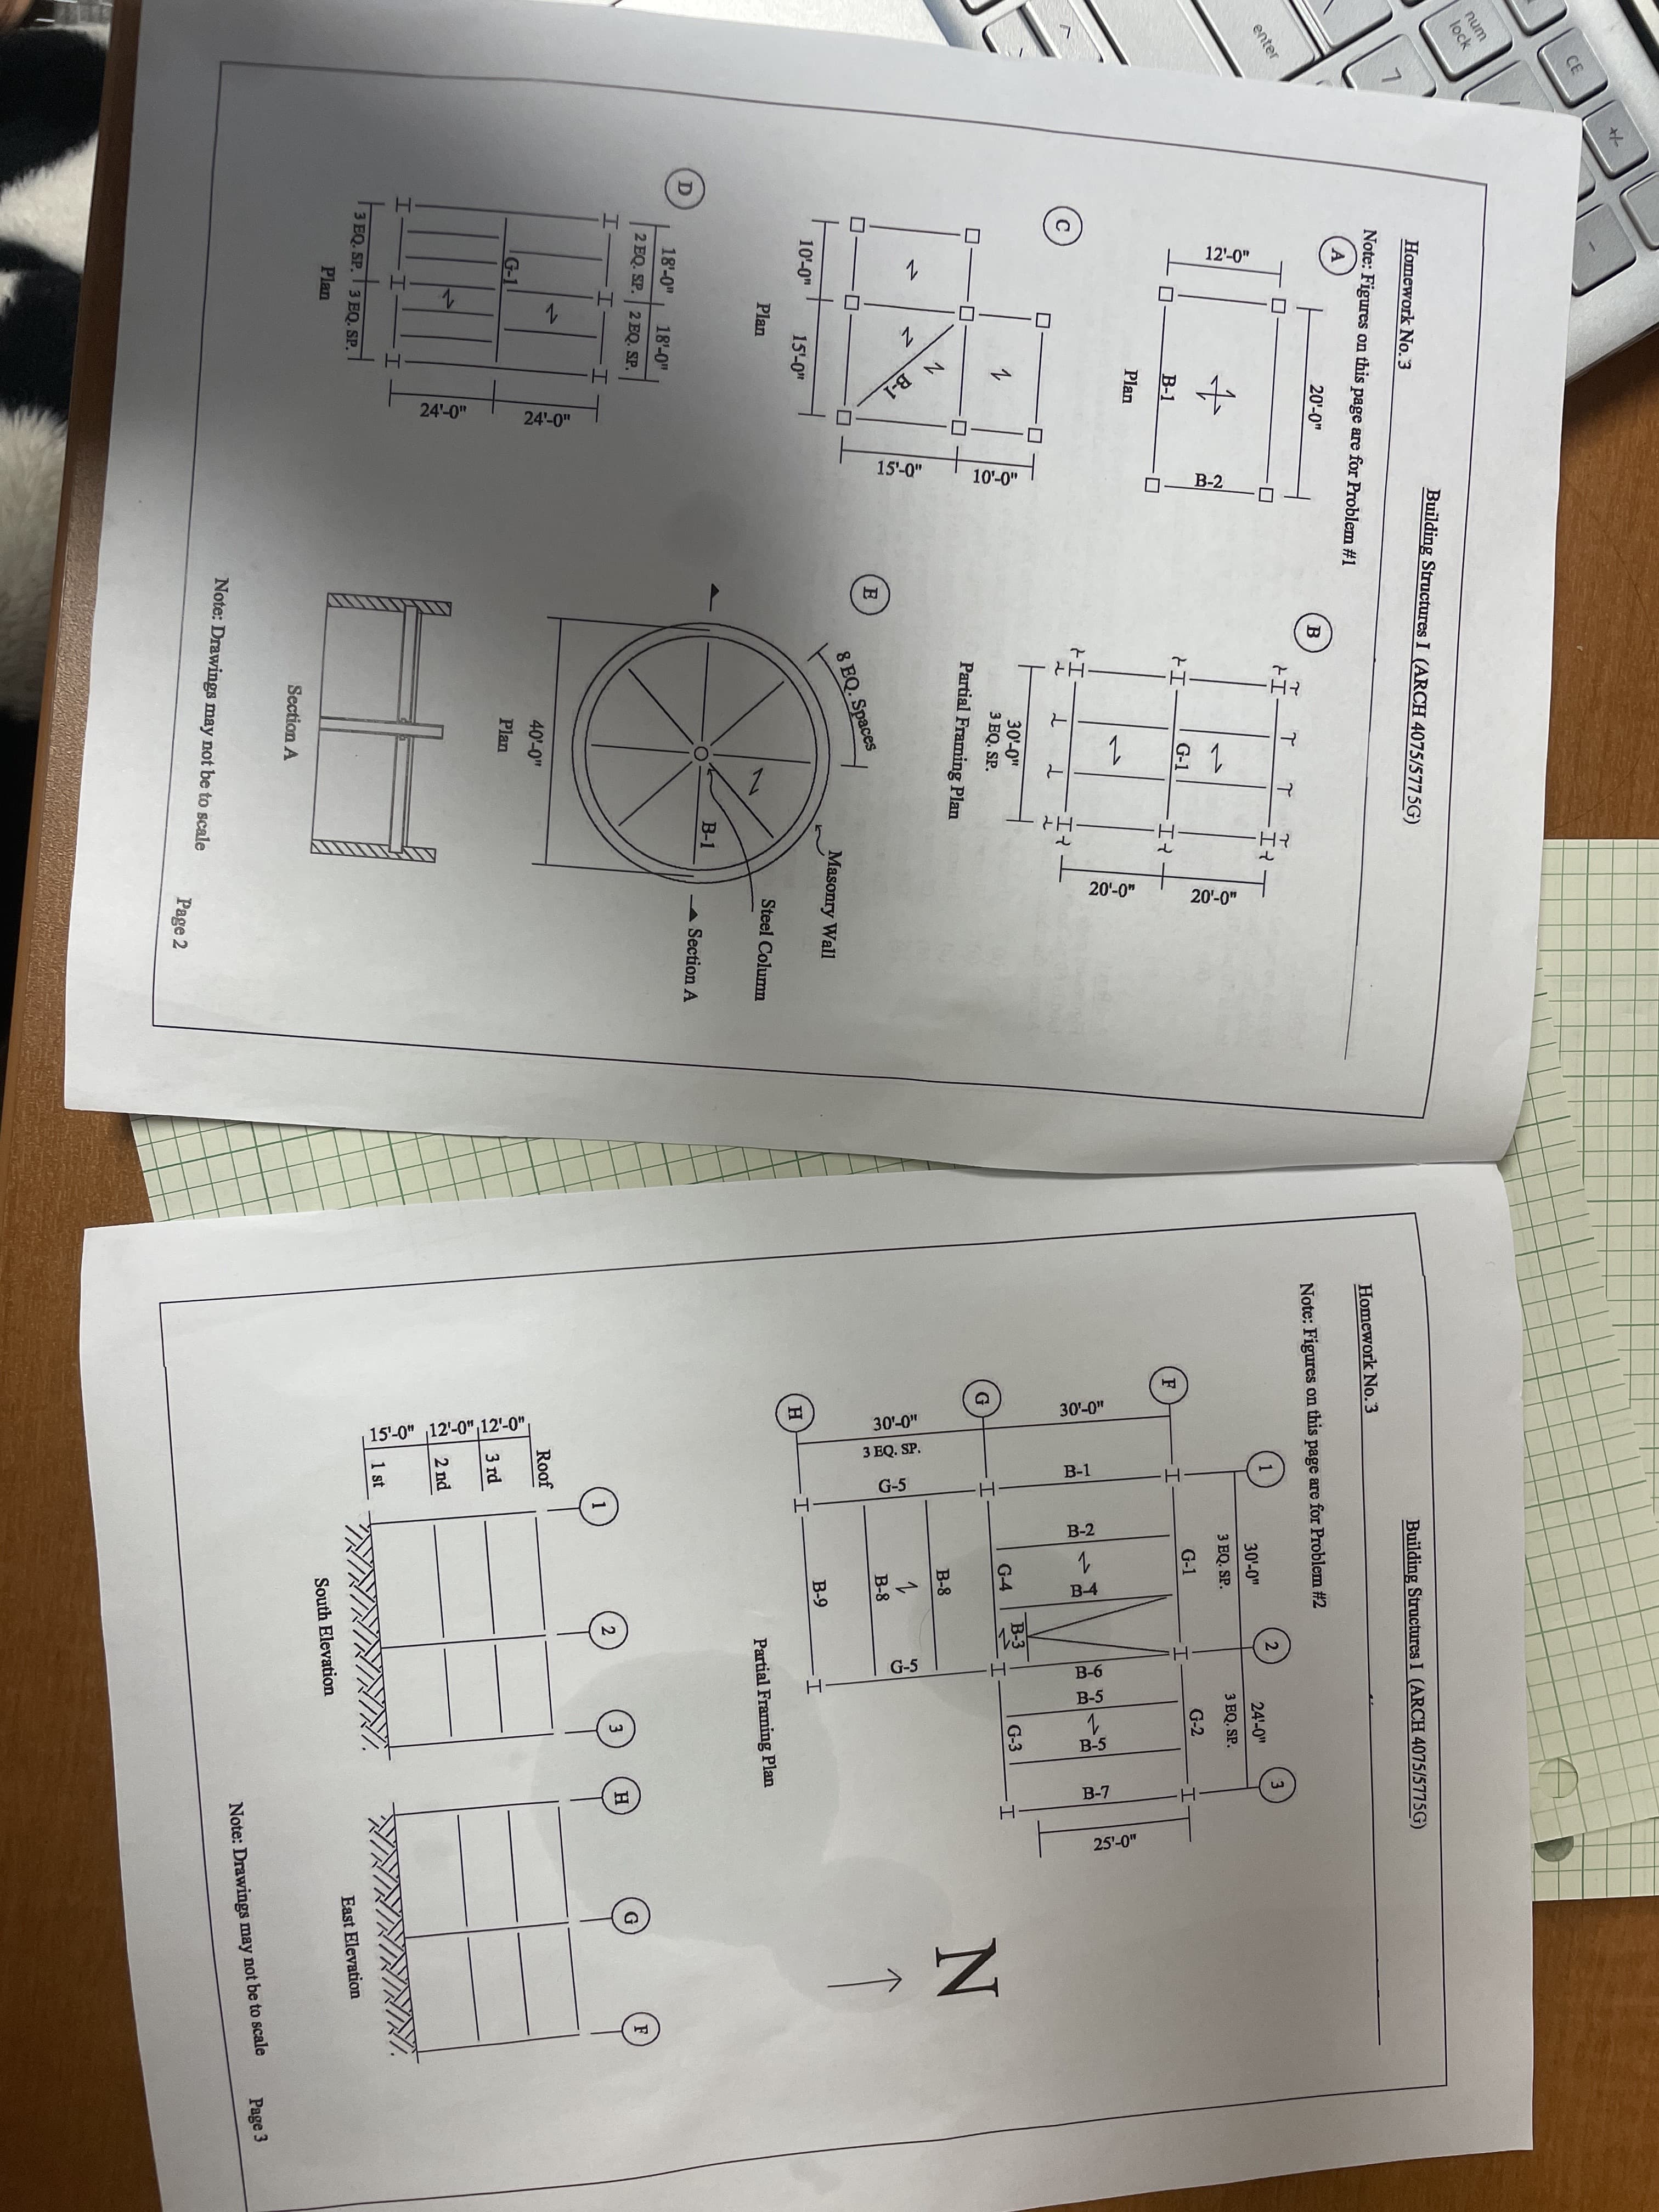 CE
num
lock
Building Structures I (ARCH 4075/5775G)
Homework No. 3
7
Note: Figures on this page are for Problem #1
Building Structures I (ARCH 4075/5775G)
A
Homework No.3
20'-0"
B
enter
Note: Figures on this page are for Problem #2
3.
30'-0"
24'-0"
3 EQ. SP.
3 EQ. SP.
В-1
G-1
G-1
G-2
Plan
F
C
30'-0"
3 EQ. SP.
Partial Framing Plan
B-3
G-4
G-3
I-
B-8
E
B-8
8 EQ. Spaces
10'-0"
Masonry Wall
15-0"
B-9
Plan
Steel Column
Partial Framing Plan
B-1
18'-0"
Section A
18'-0"
2 EQ. SP. 2 EQ. SP.
I.
2
3
H
1
40'-0"
G-1
Roof
Plan
3 rd
HI
2 nd
3 EQ. SP. I 3 EQ. SP.
Plan
1 st
Section A
East Elevation
South Elevation
Note: Drawings may not be to scale
Page 3
Note: Drawings may not be to scale
Page 2
12'-0"
N B-1
24'-0"
24-0"
15'-0"
10'-0"
B-2
-H-
| 15'-0" 12'-0",12'-0",
3 EQ. SP.
B-1
G-5
B-2
B-4
G-5
B-6
B-5
B-5
B-7
25'-0"
